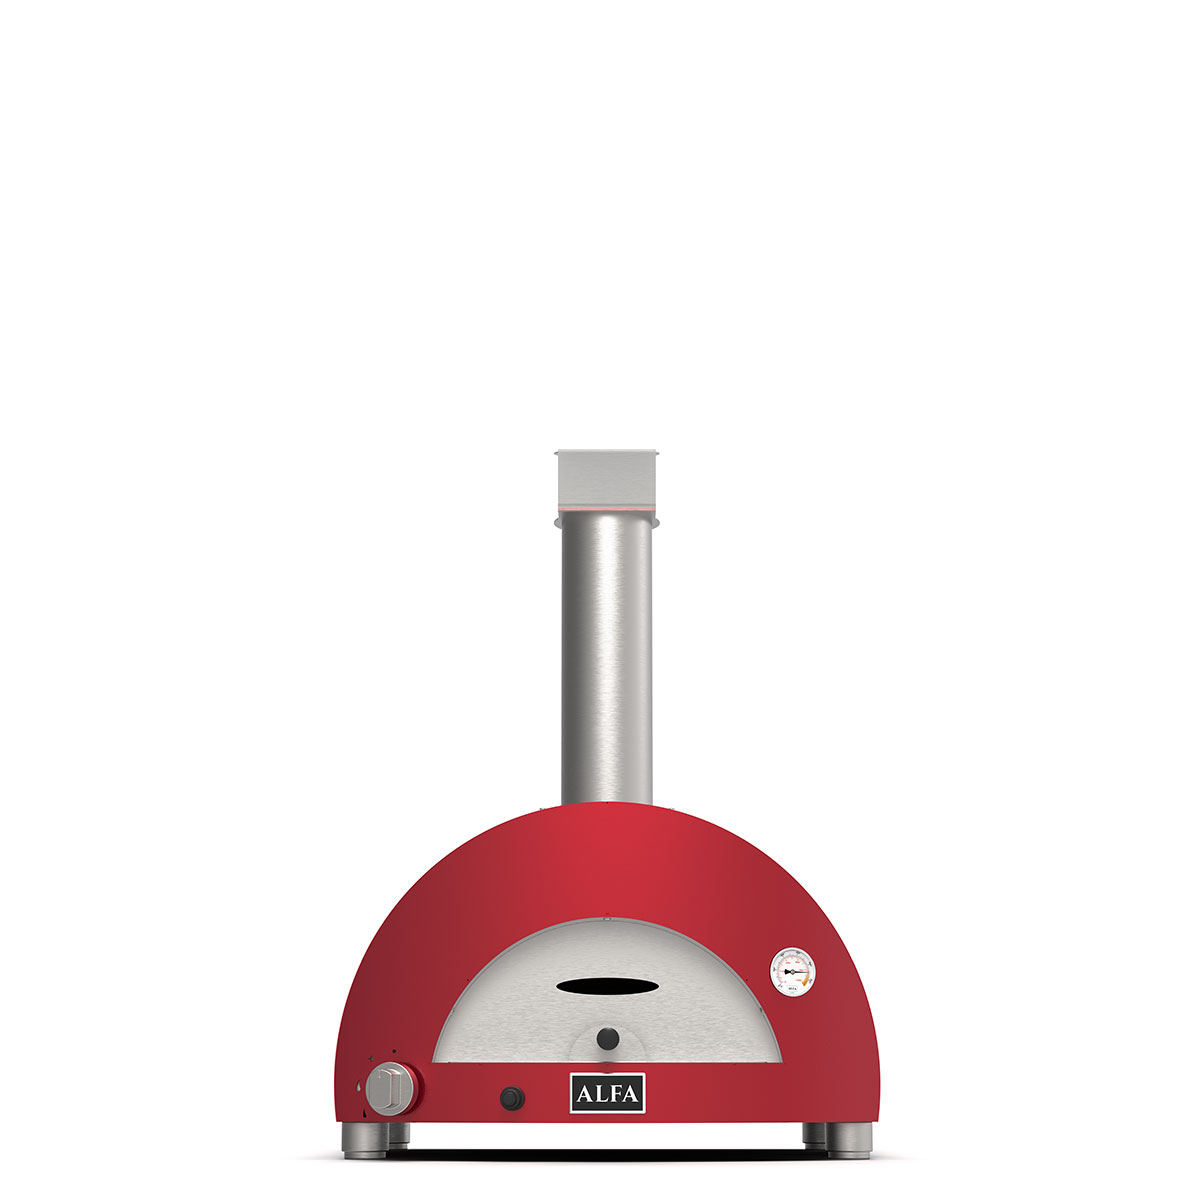 Wood burning pizza ovens for home use | Alfaforni